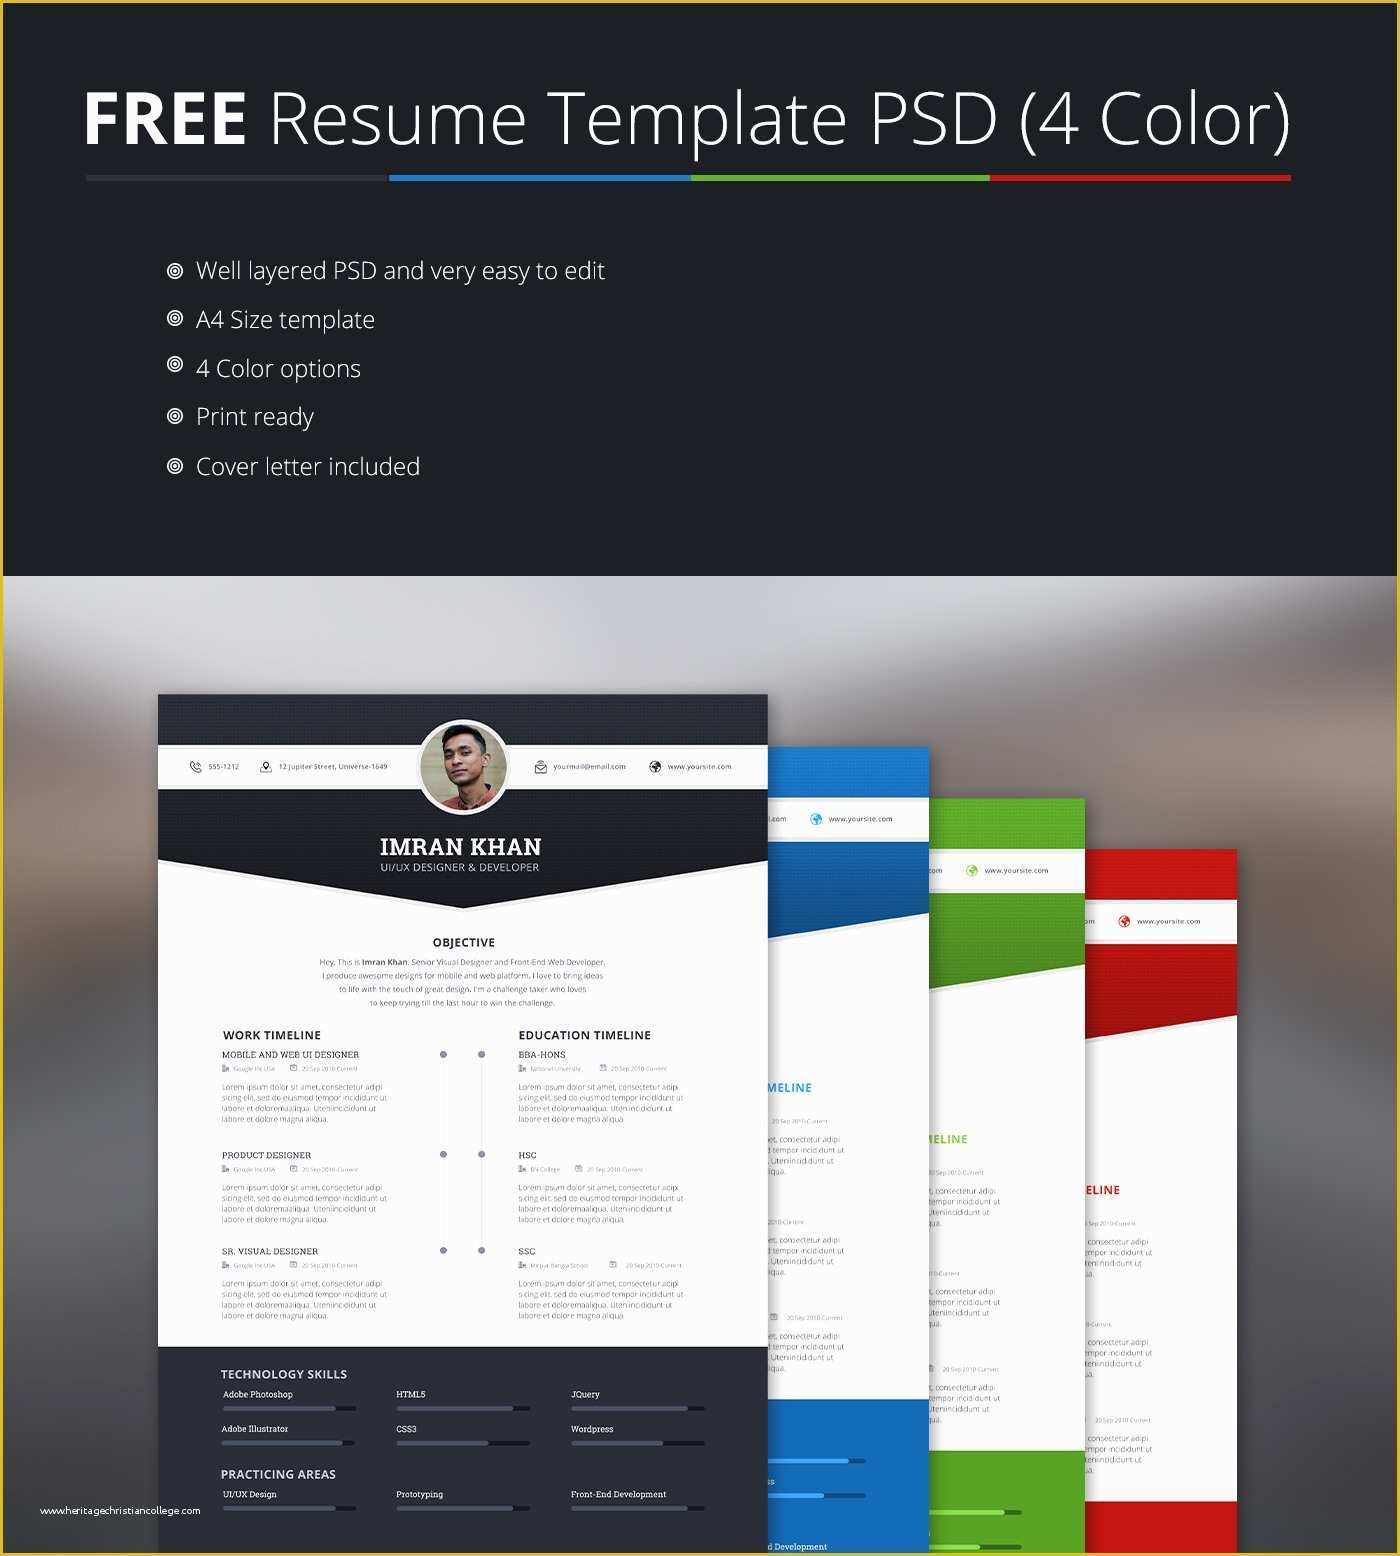 Free Resume Website Templates Download Of Free Psd Resume Template In Four Colors